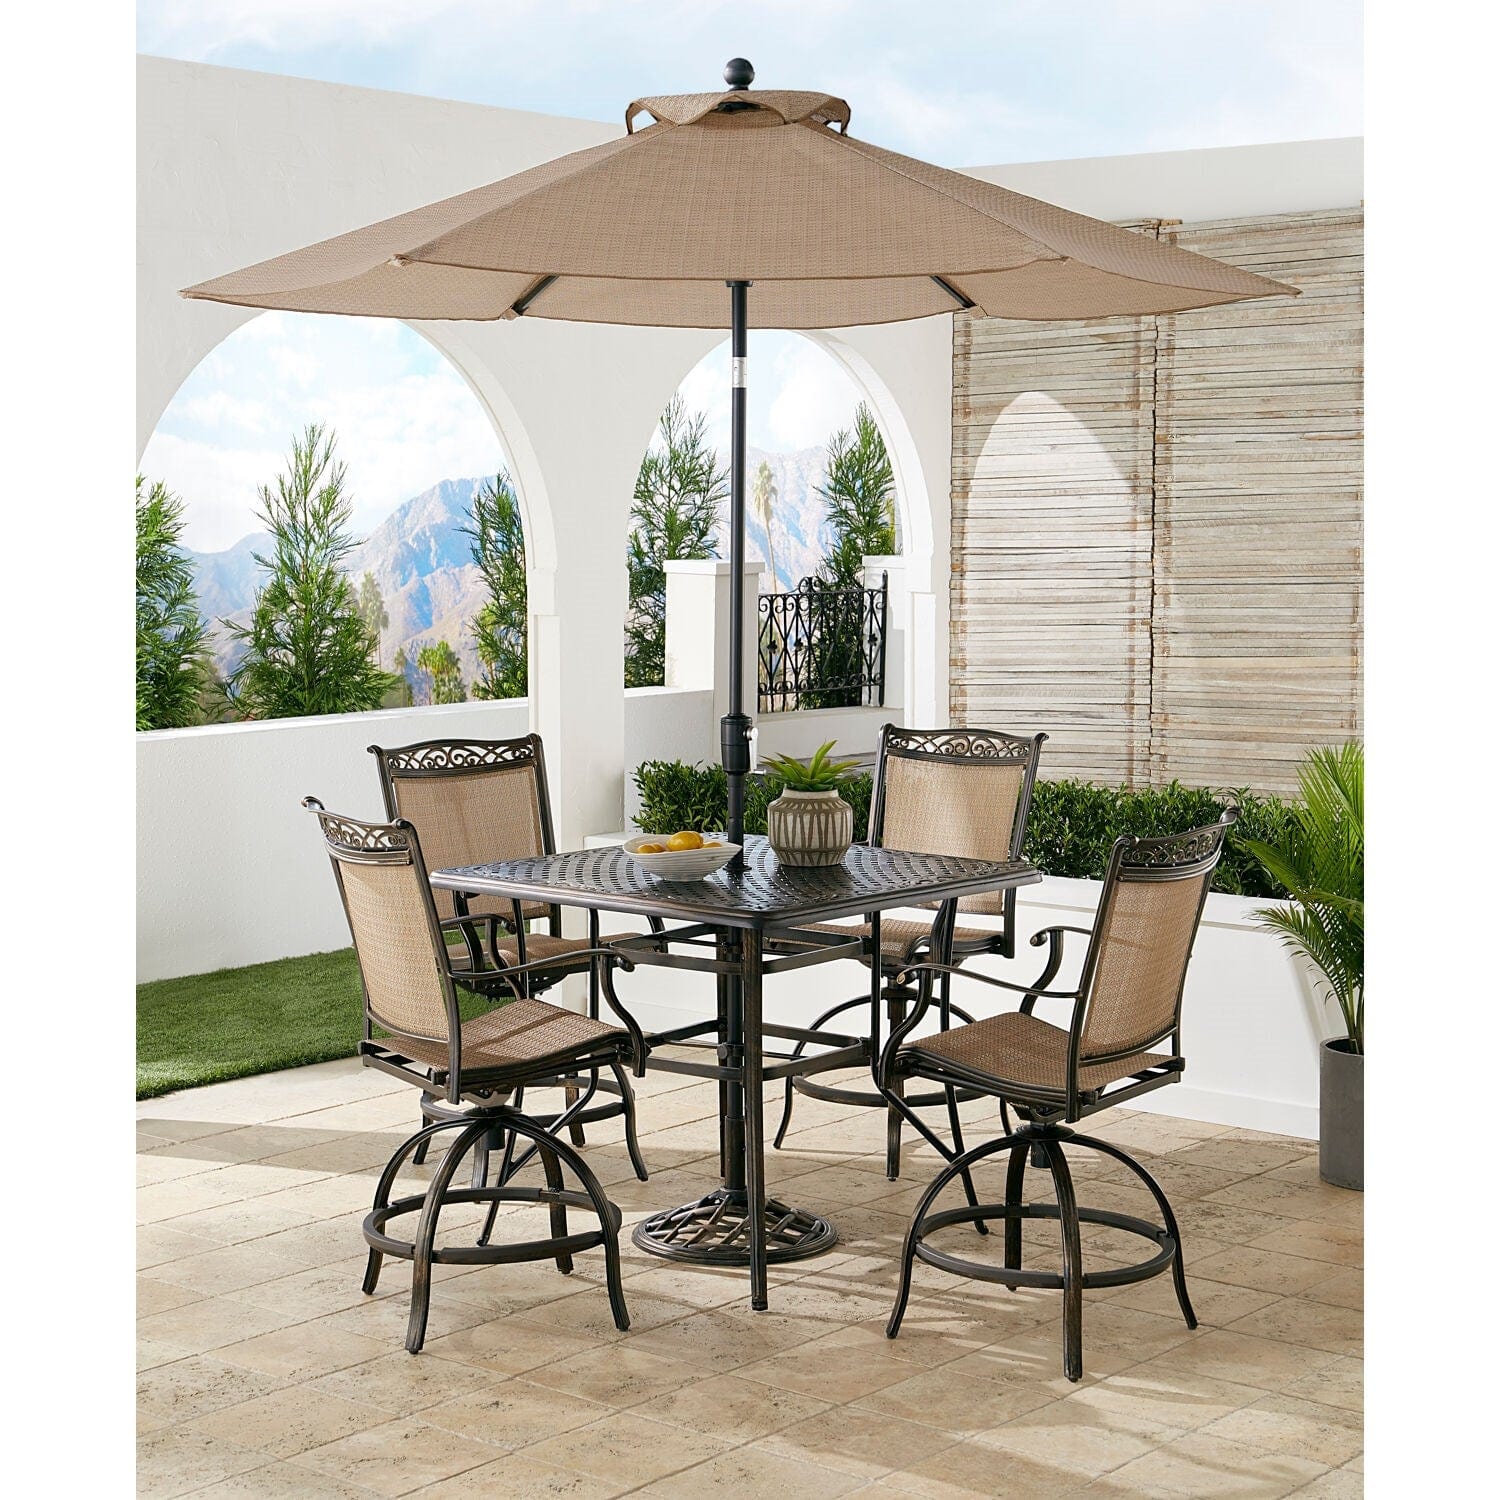 Hanover Outdoor Dining Set Hanover Fontana 5-Piece High-Dining Set with 4 Counter-Height Swivel Chairs, 42-in. x 42-in. Cast-Top Table, Umbrella and Base | FNTDN5PCPSQBR-SU